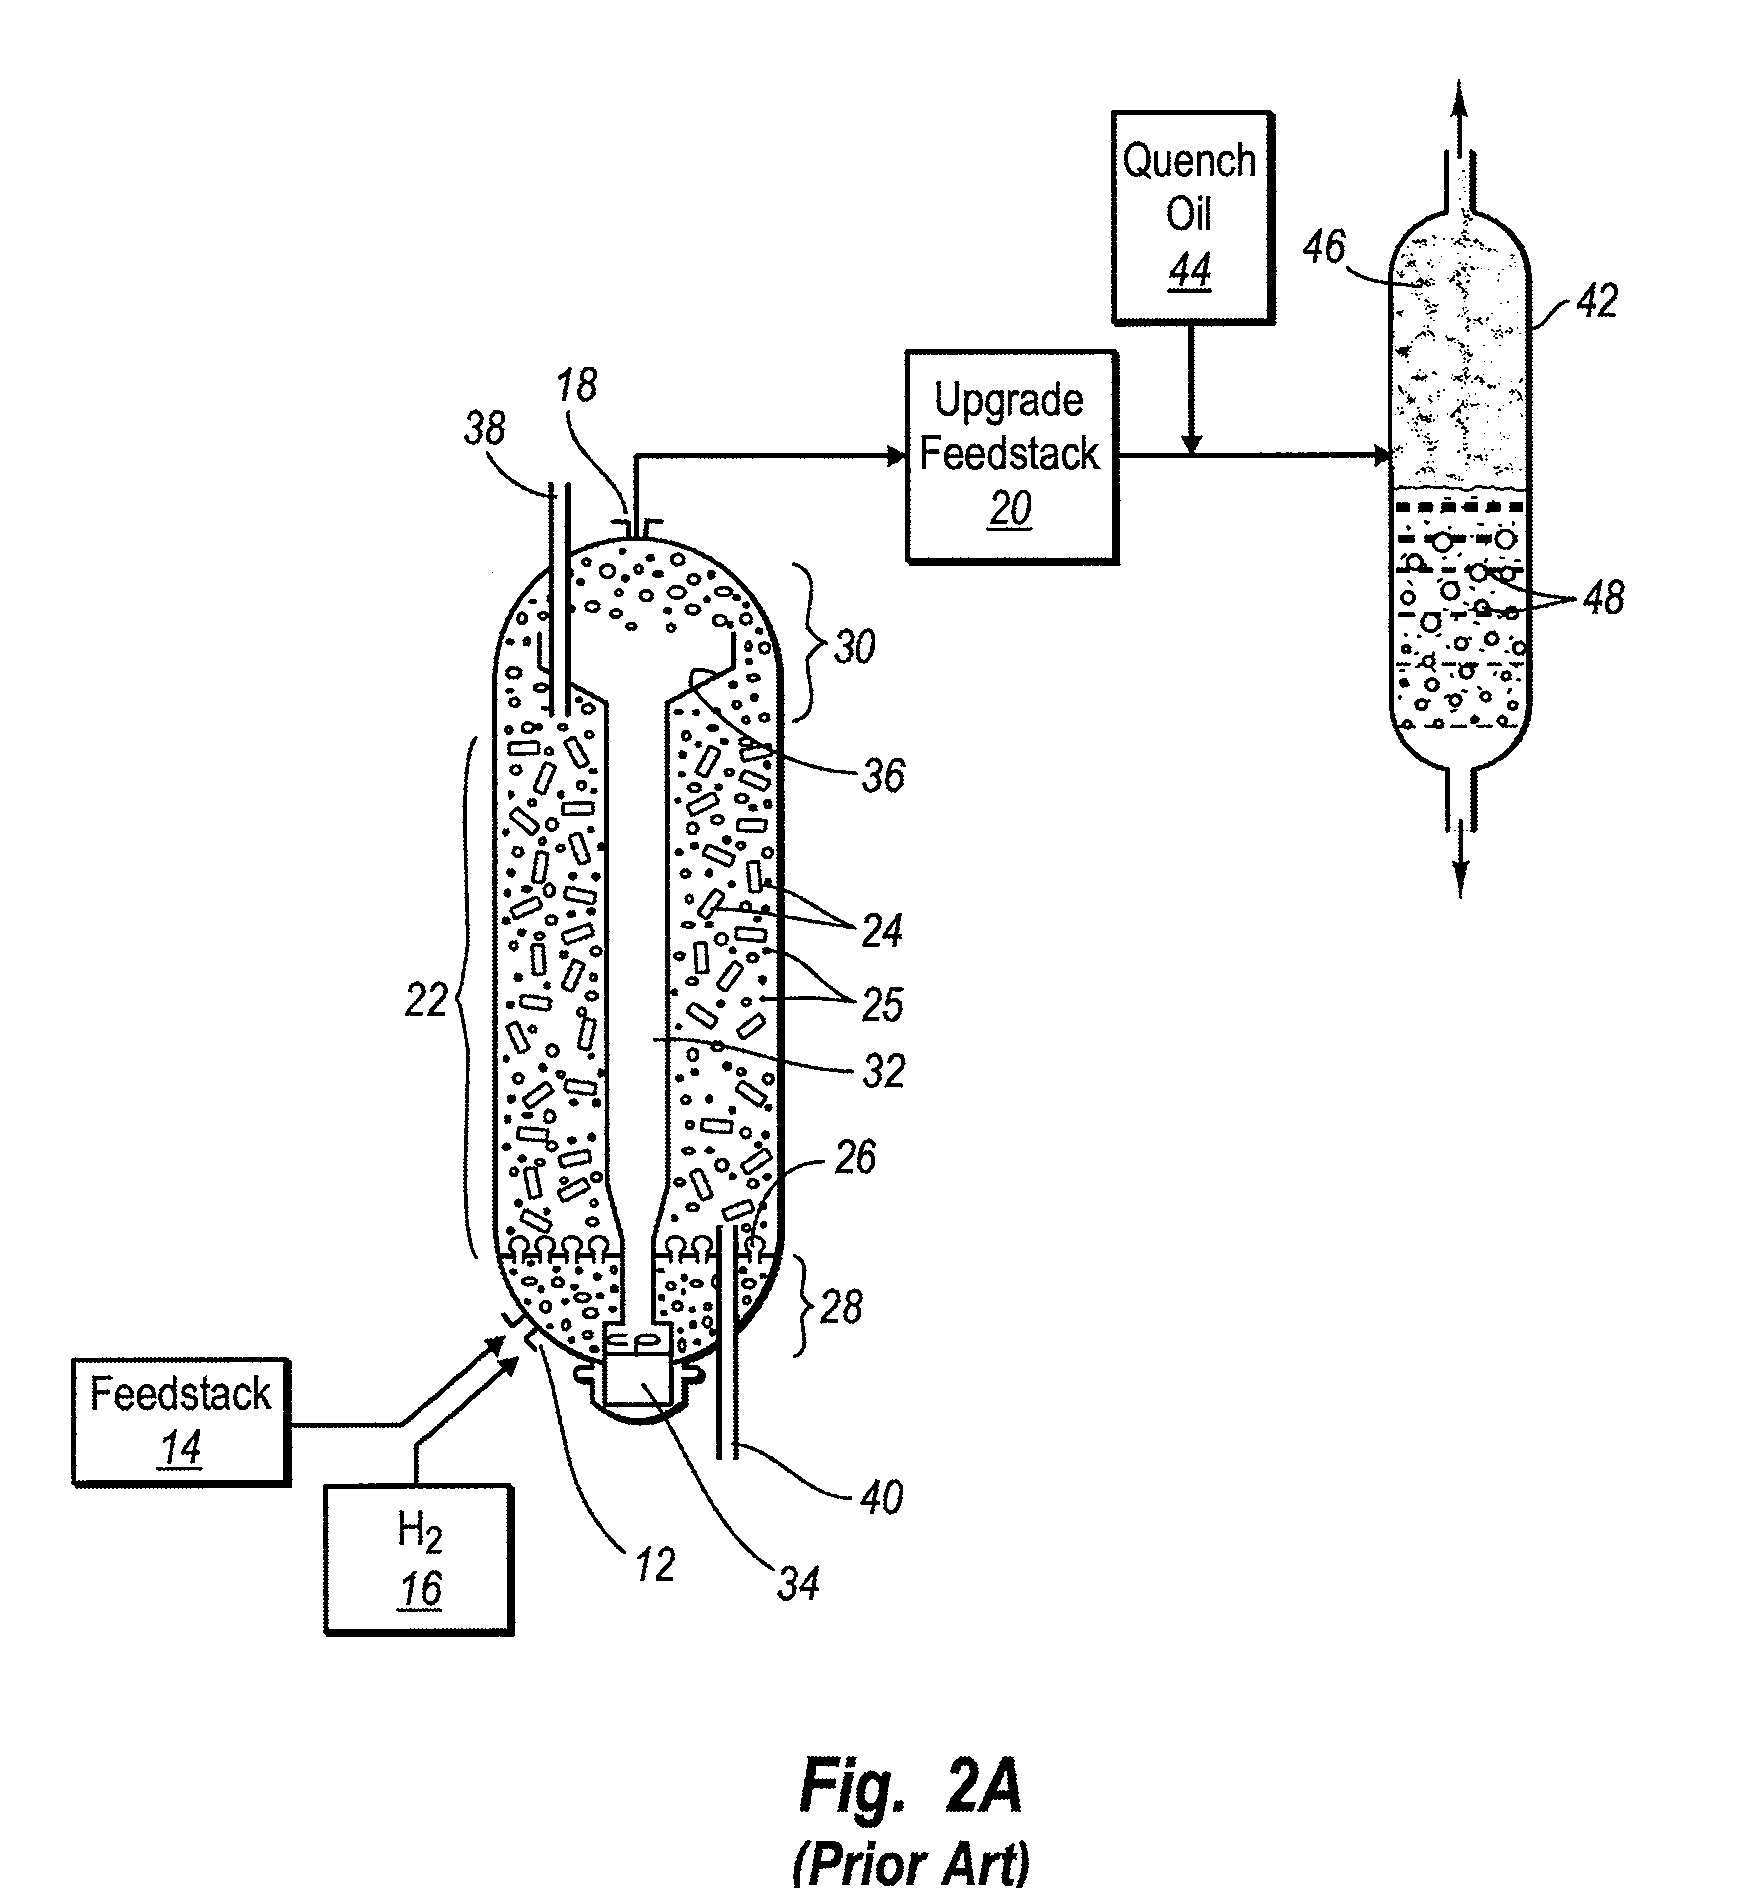 Ebullated bed hydroprocessing systems